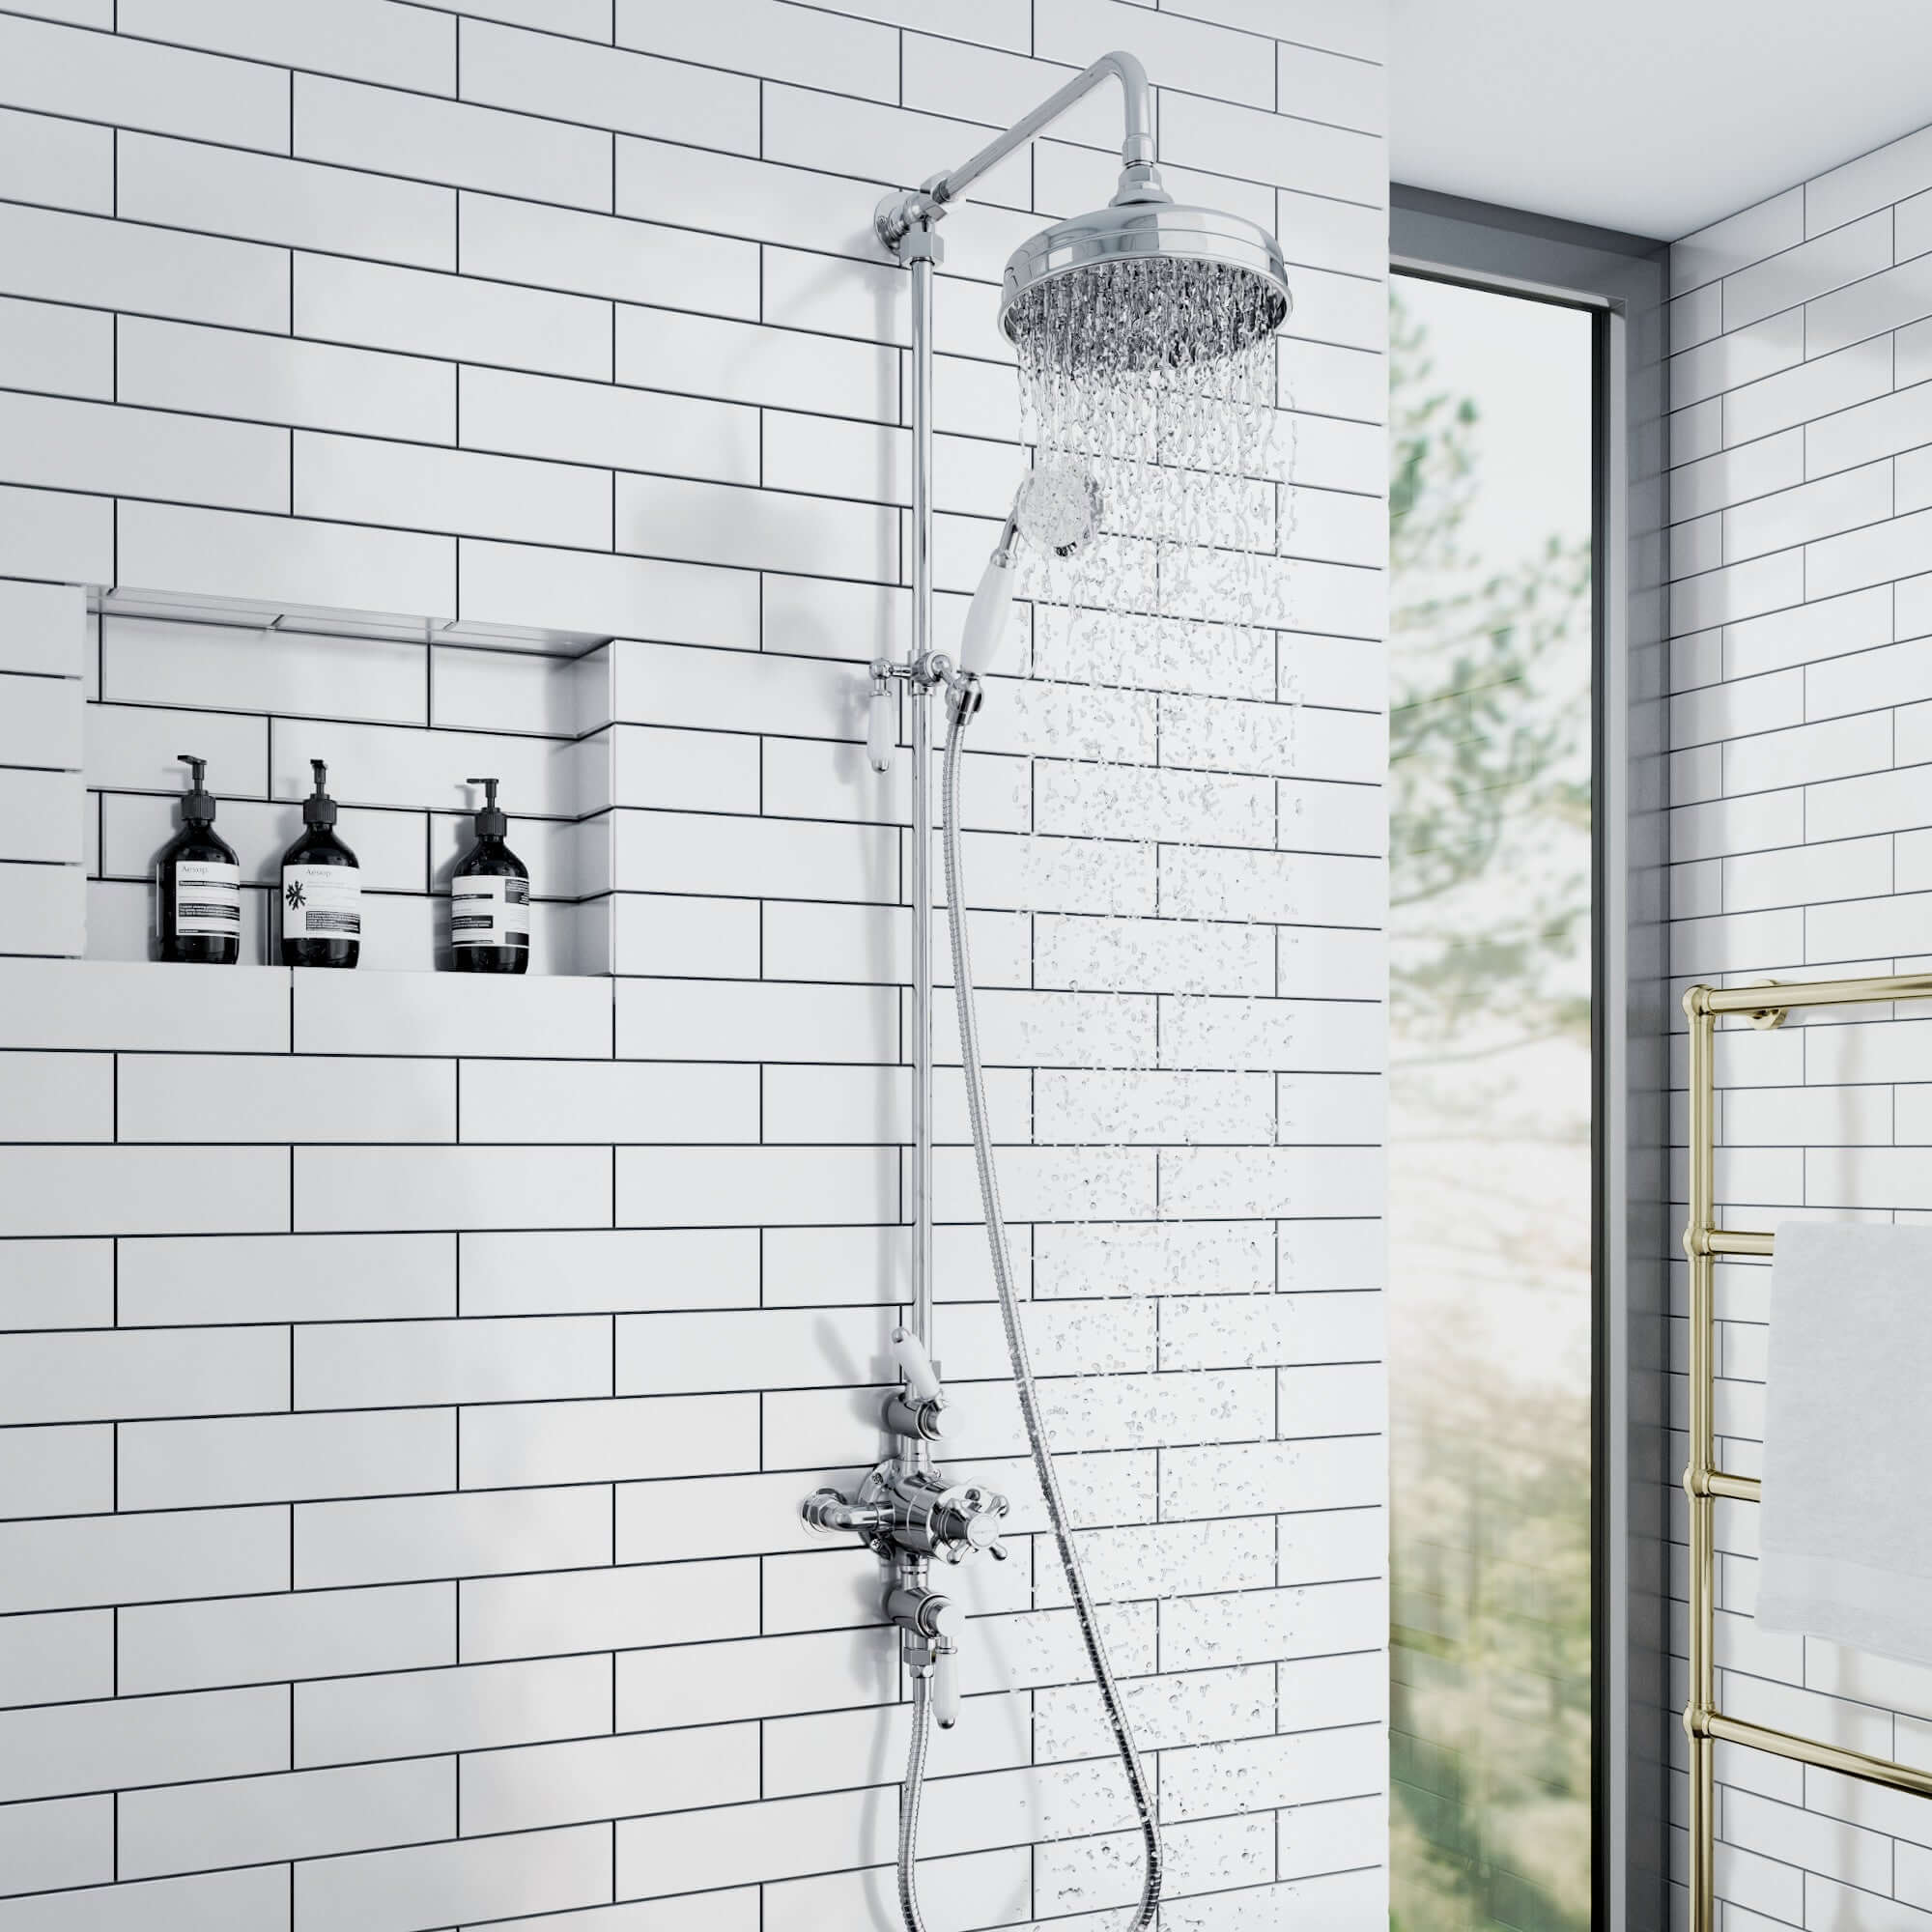 Downton Exposed Traditional Thermostatic Shower Set 2 Outlet, Incl. Triple Shower Valve, Rigid Riser Rail, 200mm Shower Head & Ceramic Handset - Chrome And White - Showers